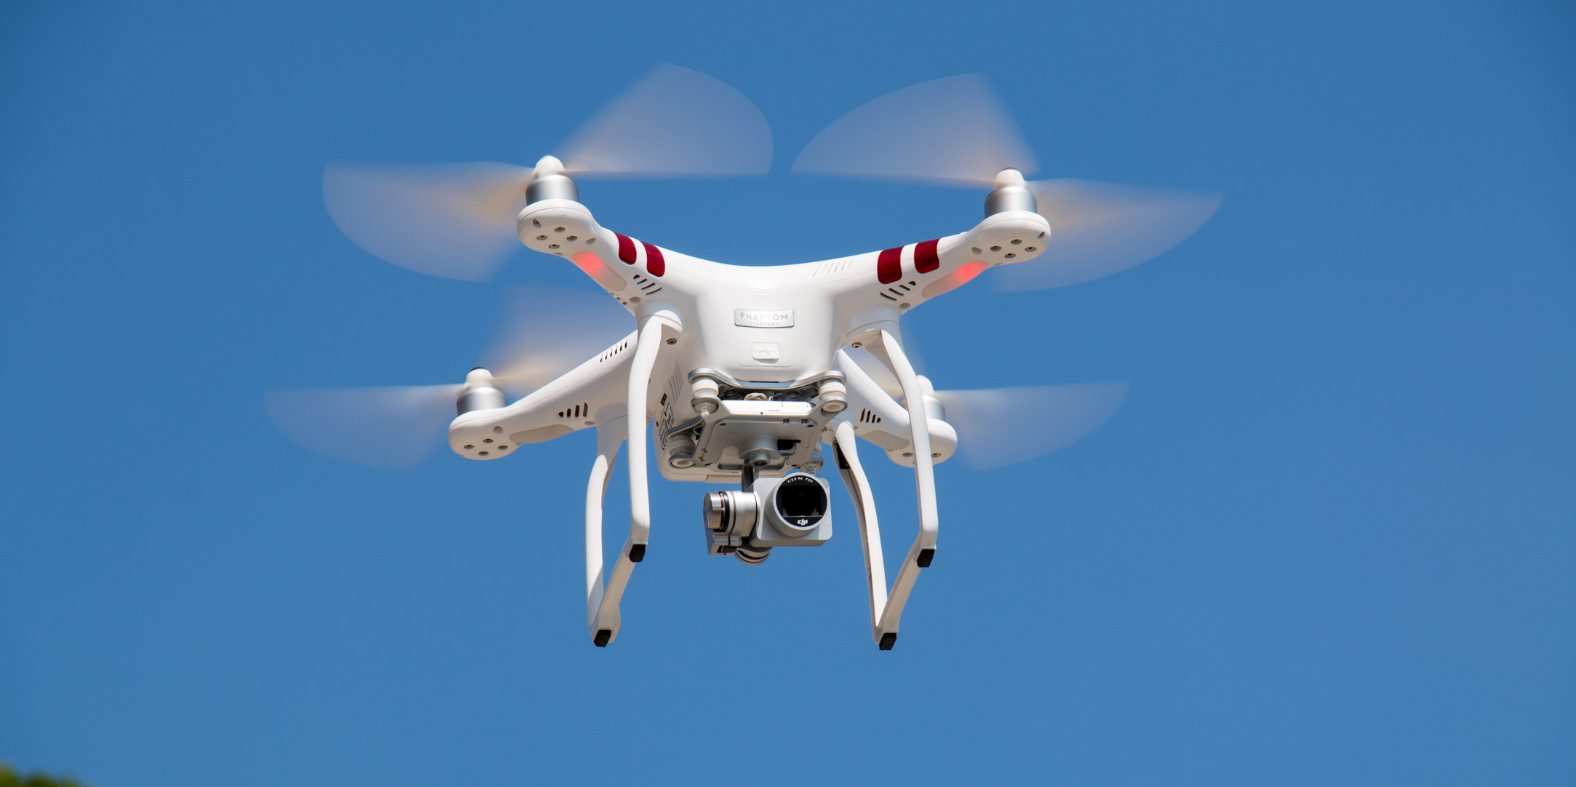 A New Outlook on Buying Your First Drone